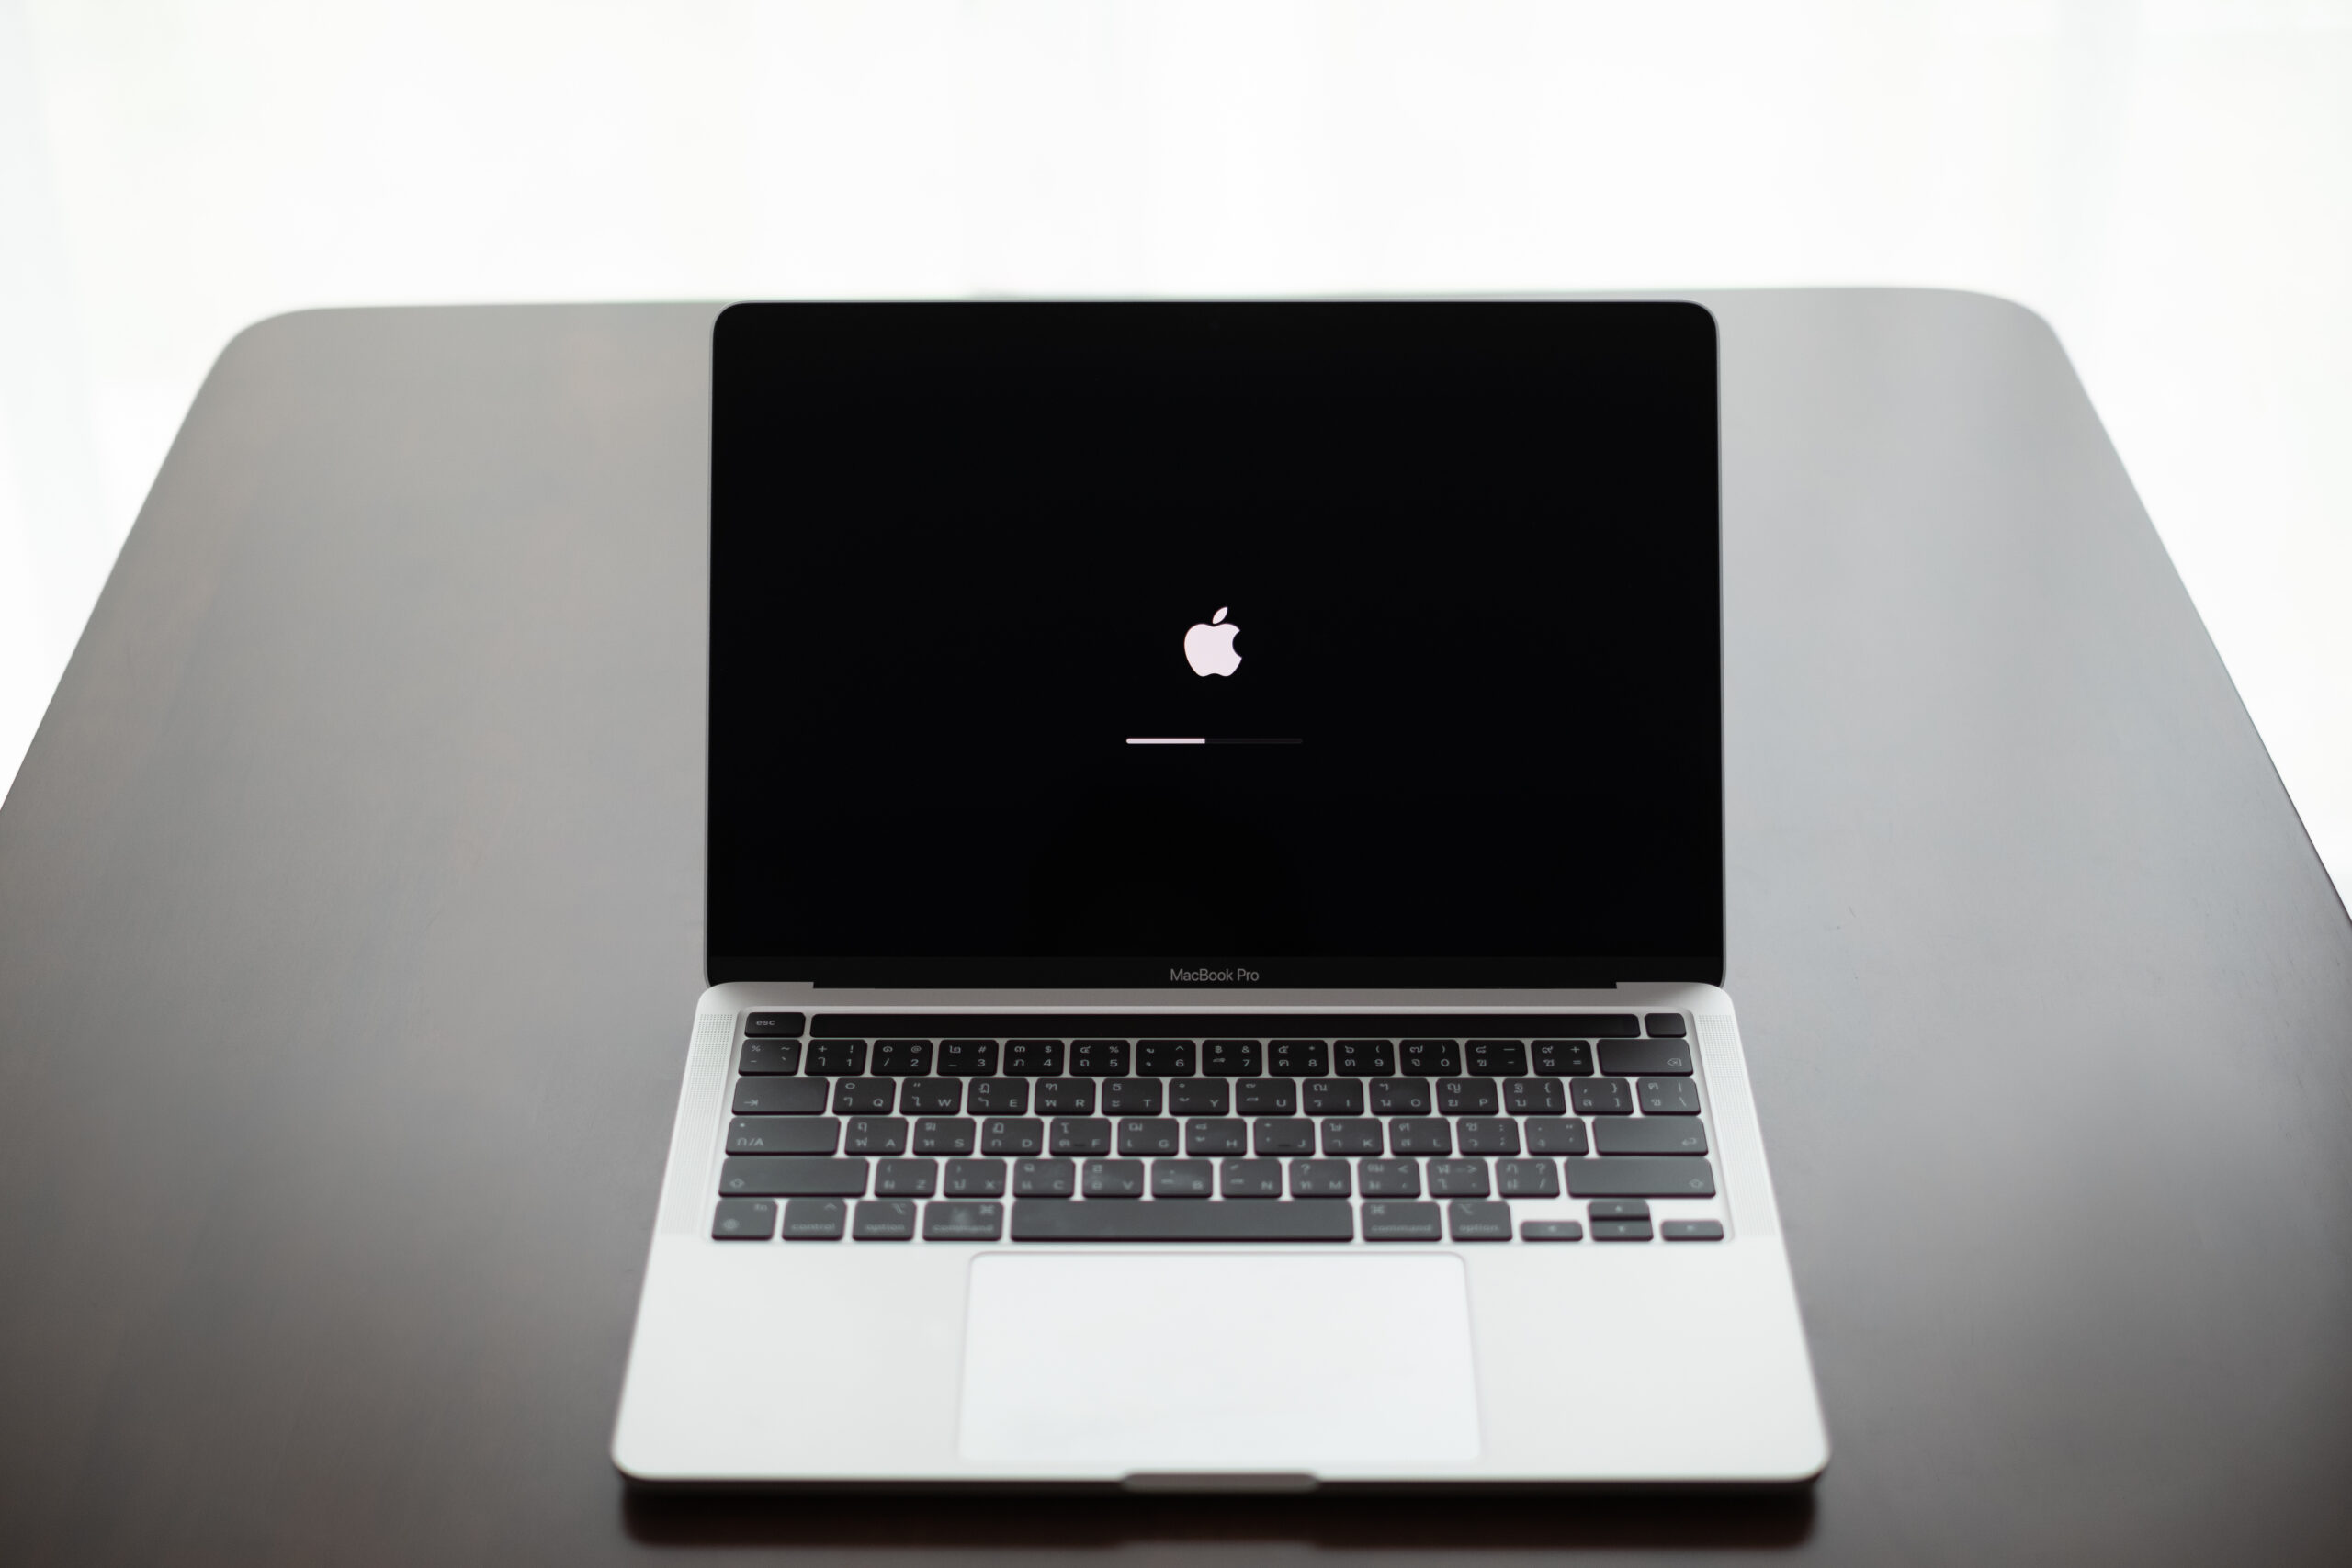 Geek insider, geekinsider, geekinsider. Com,, 3 ways to recover data from a mac that won’t boot, mac